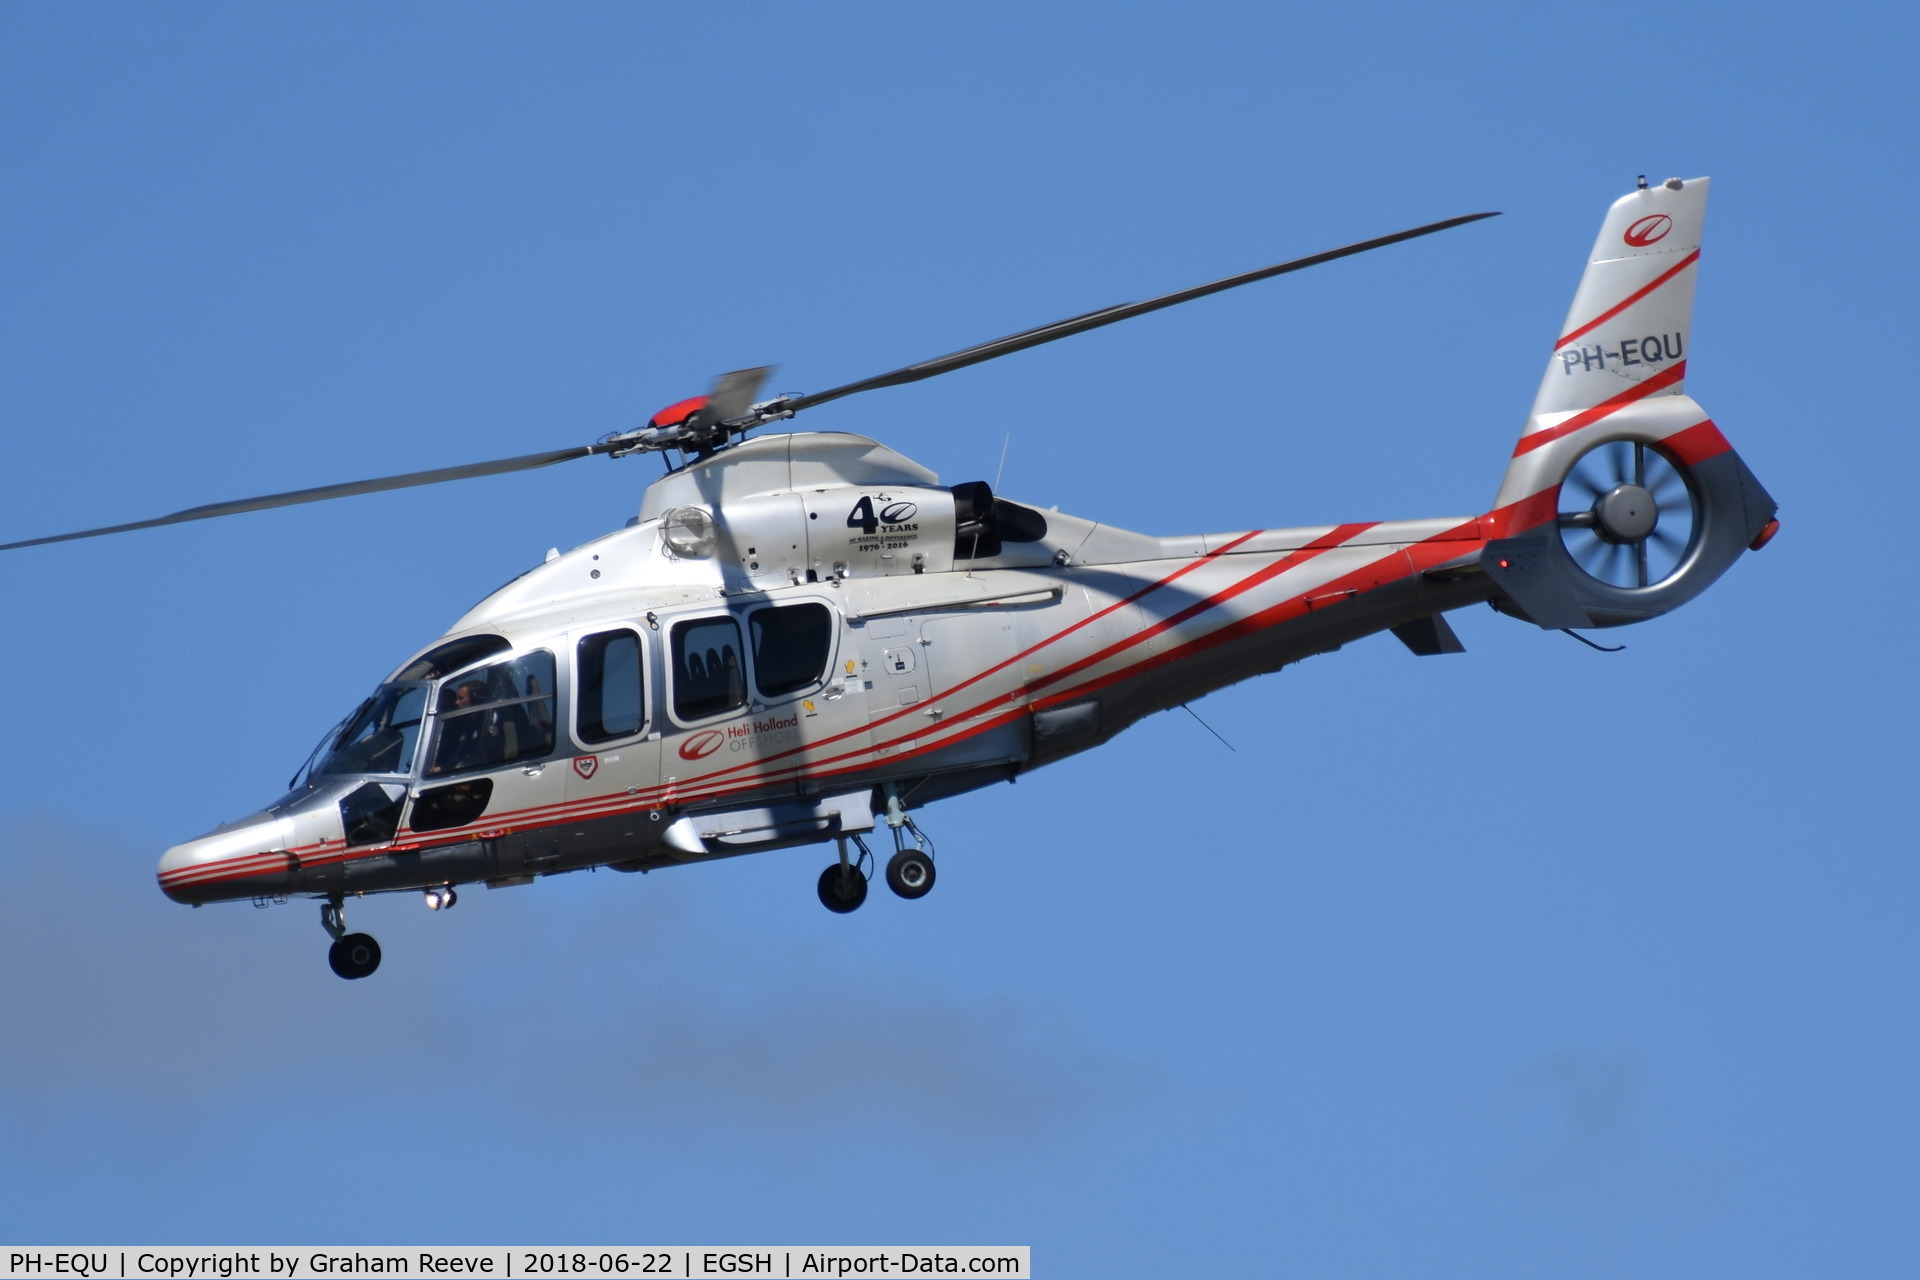 PH-EQU, 2005 Eurocopter EC-155B-1 C/N 6708, With 40th anniversary titles on the side.